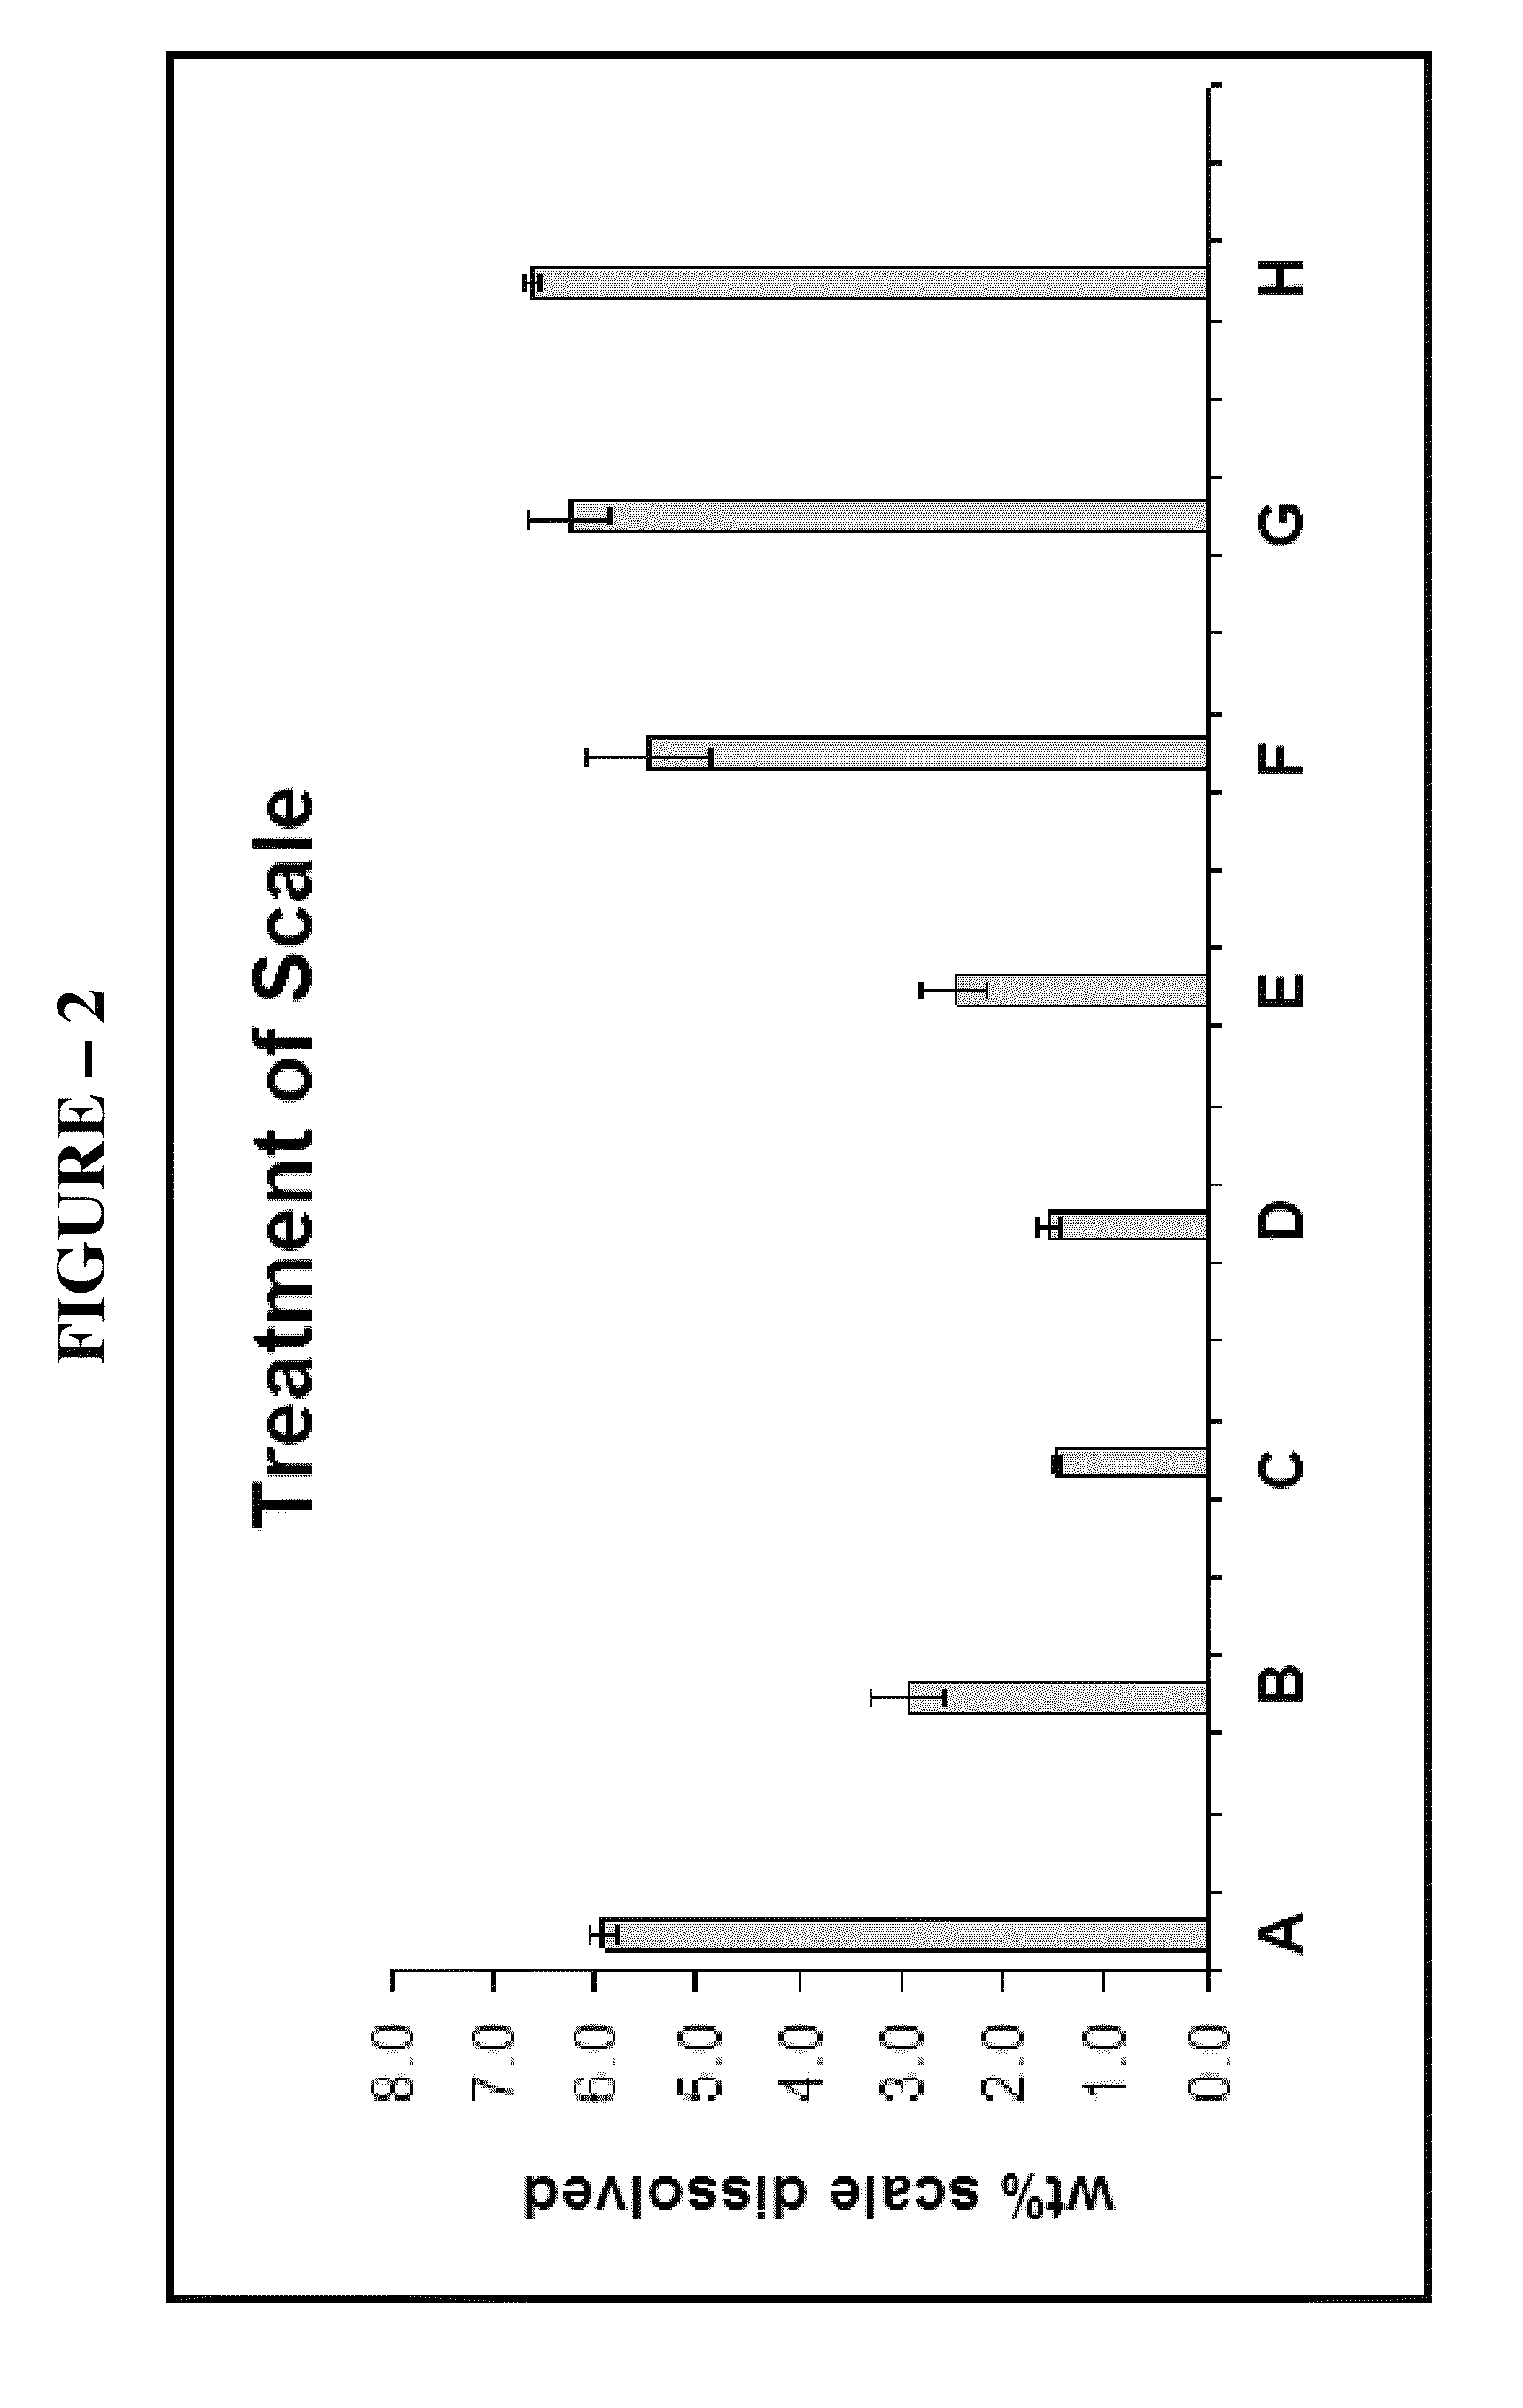 Composition comprising an alkanesulfonic acid for dissolving and/or inhibiting deposition of scale on a surface of a system